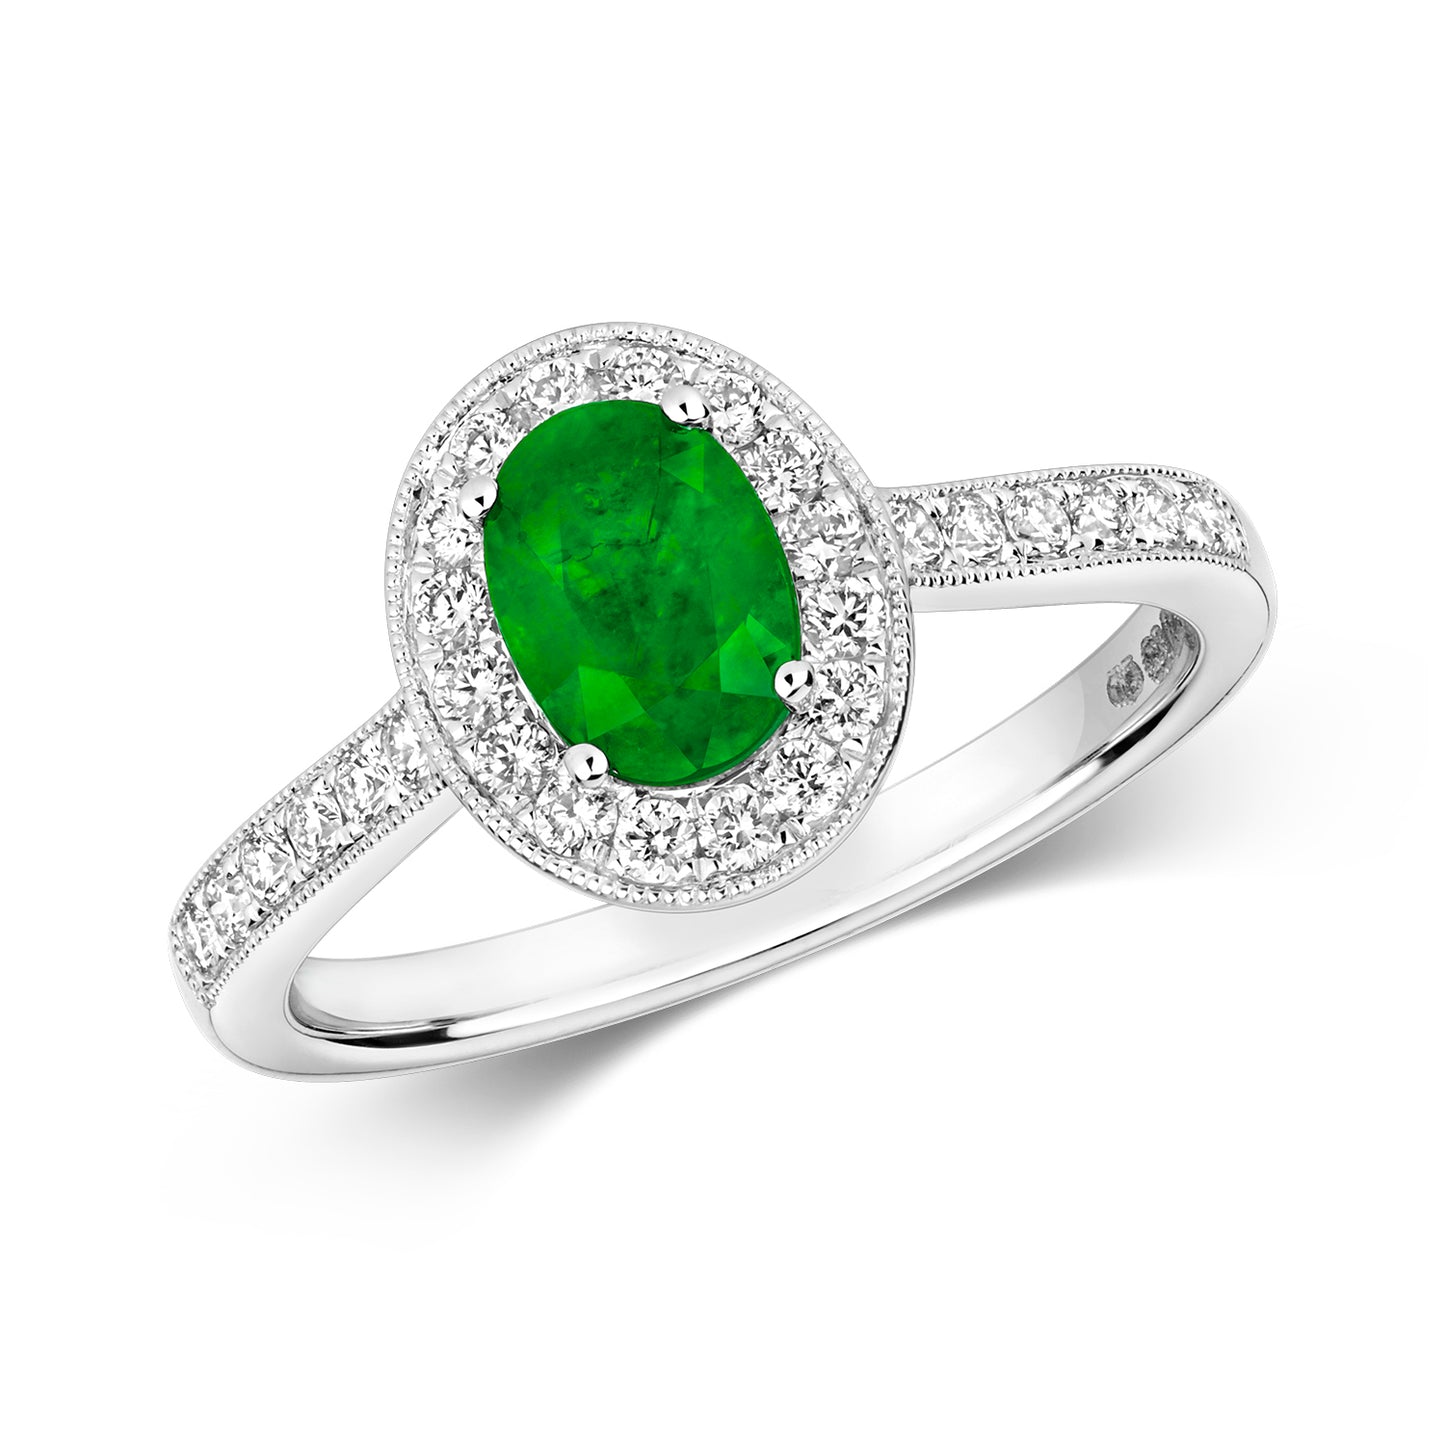 9ct White Gold 1.08 Carat Emerald and Diamond Cluster Ring  (417WE)